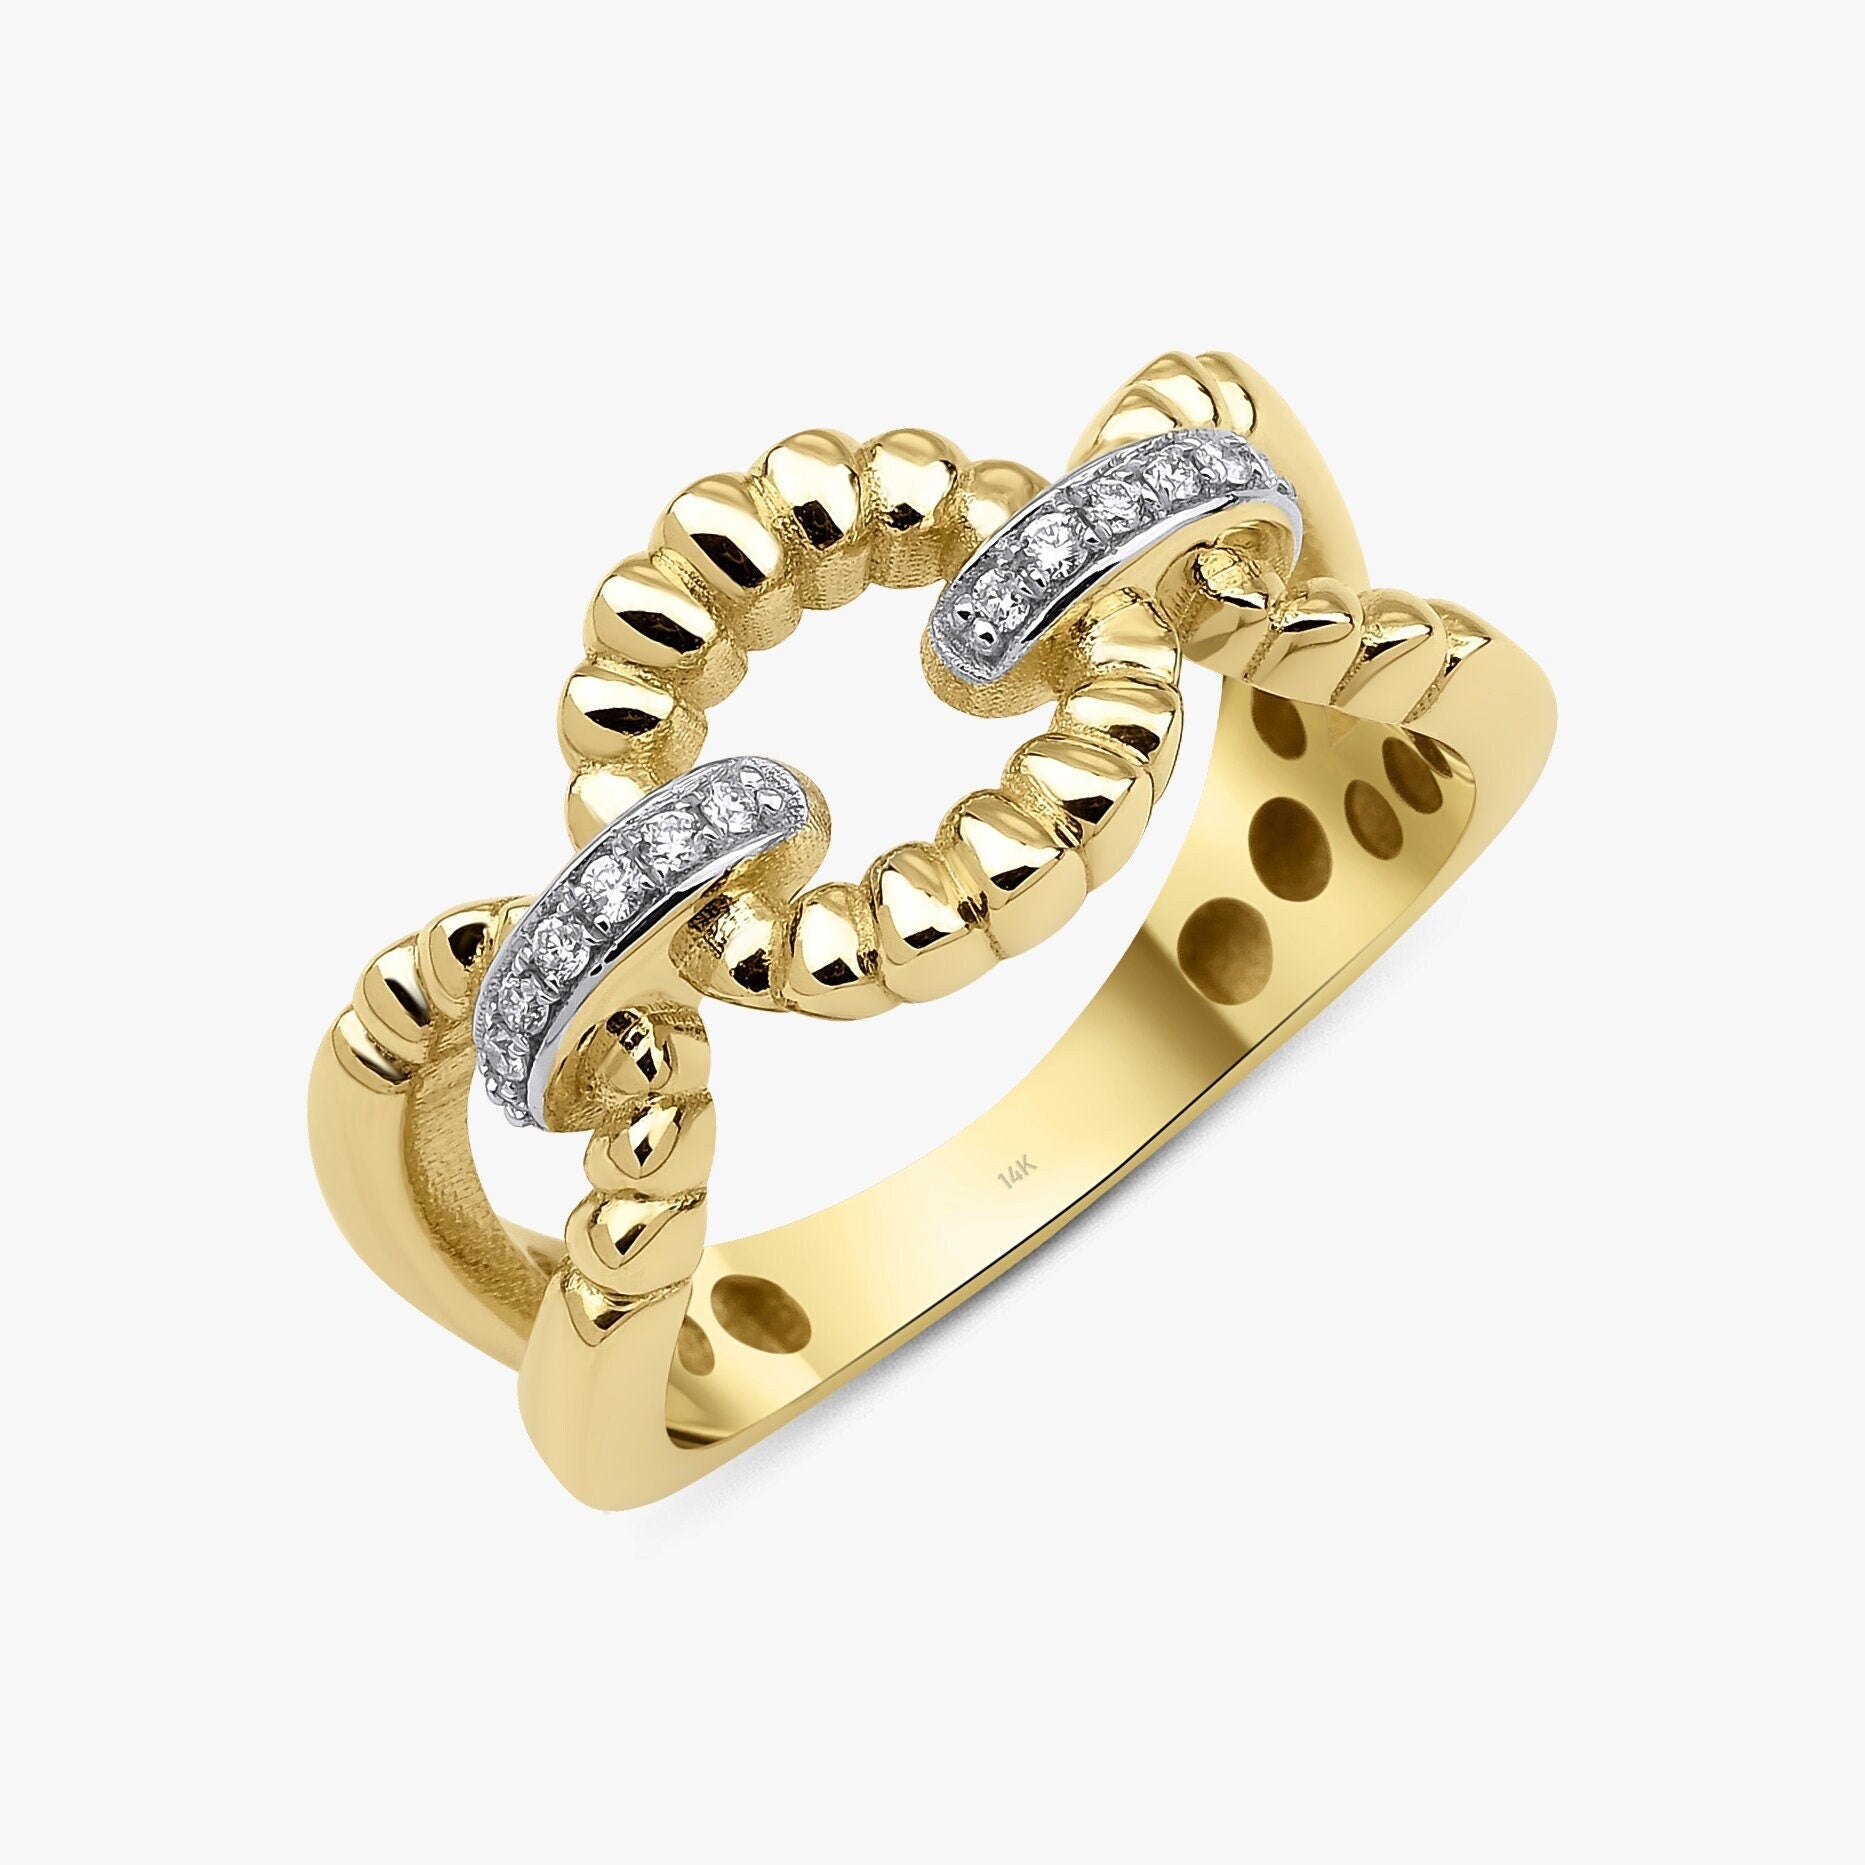 Diamond Chain Link Ring, 14K Solid Gold Chain Ring, Natural Diamond Ring, Fine Jewelry